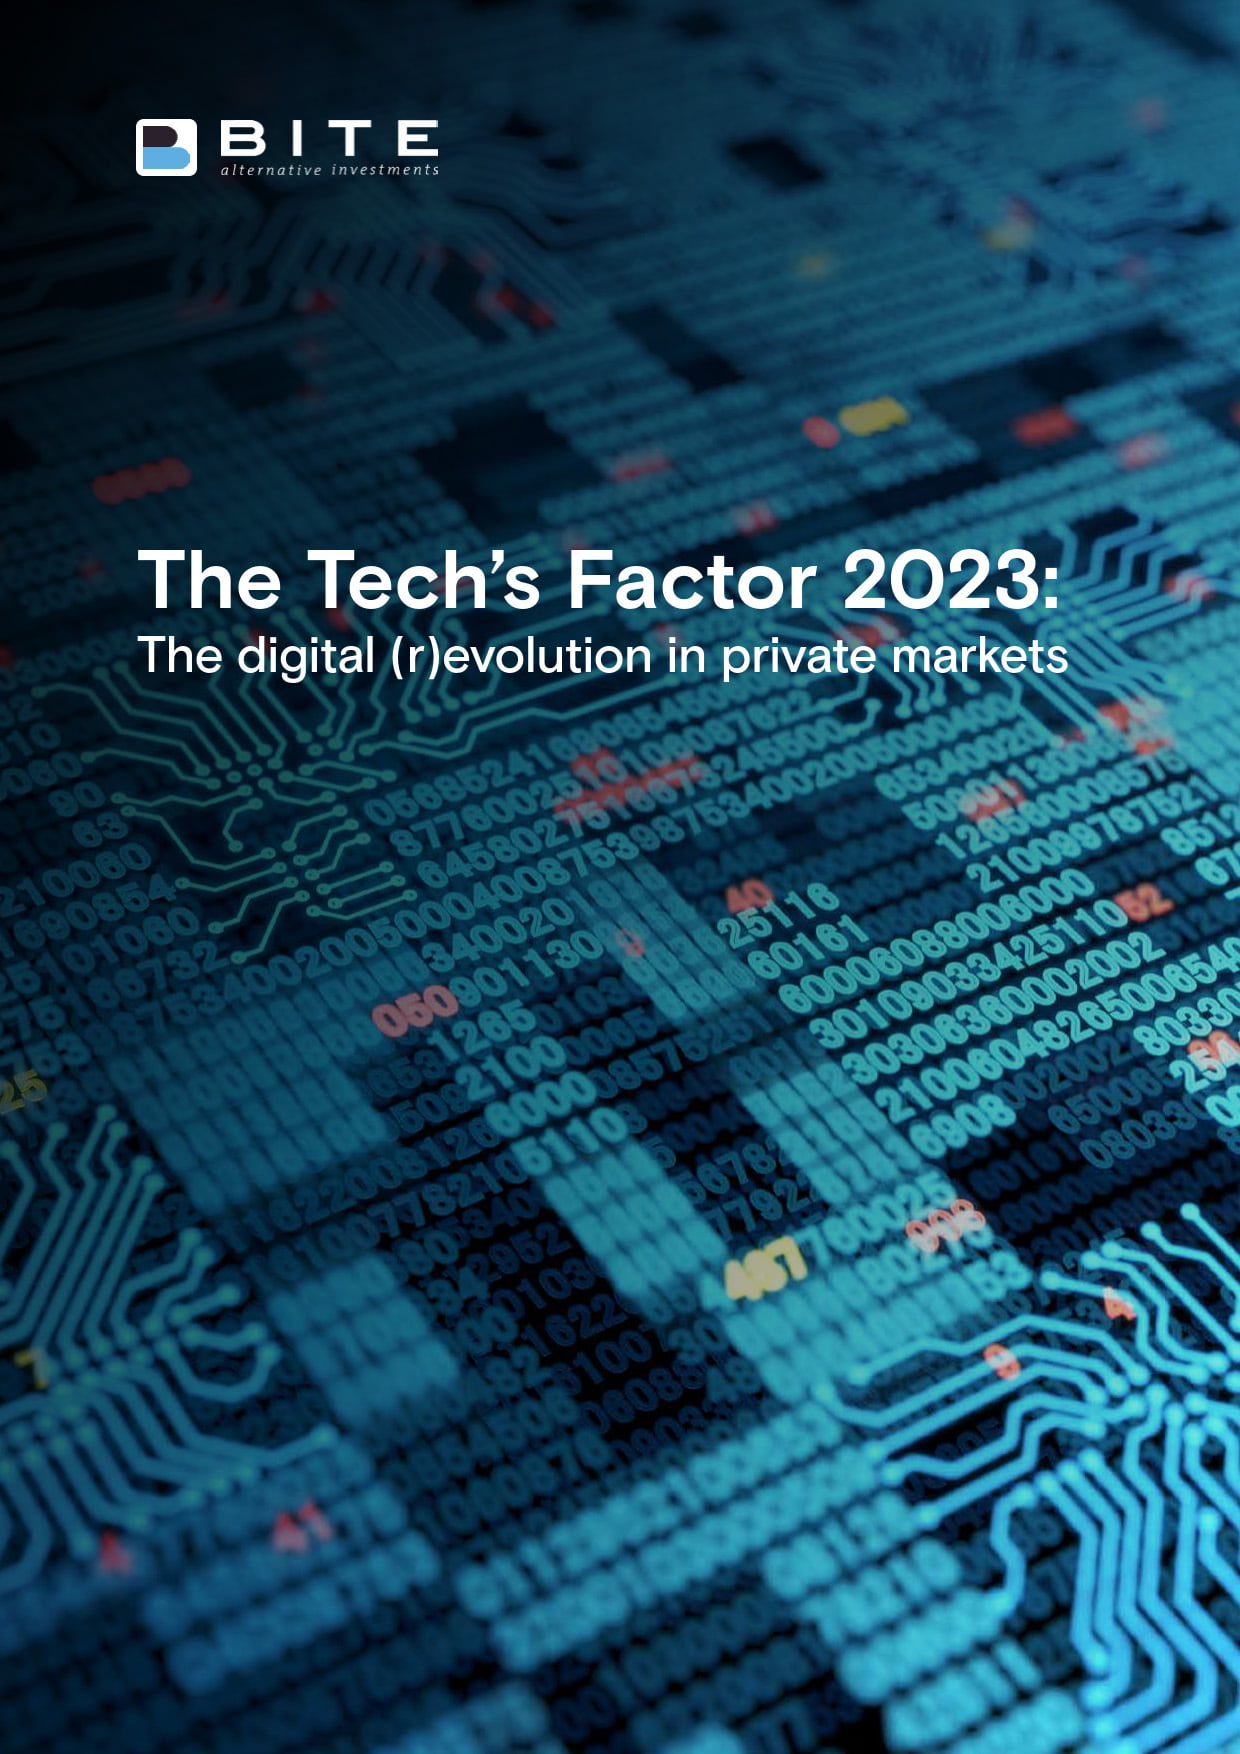 The Tech’s Factor 2023 The digital (r)evolution in private markets